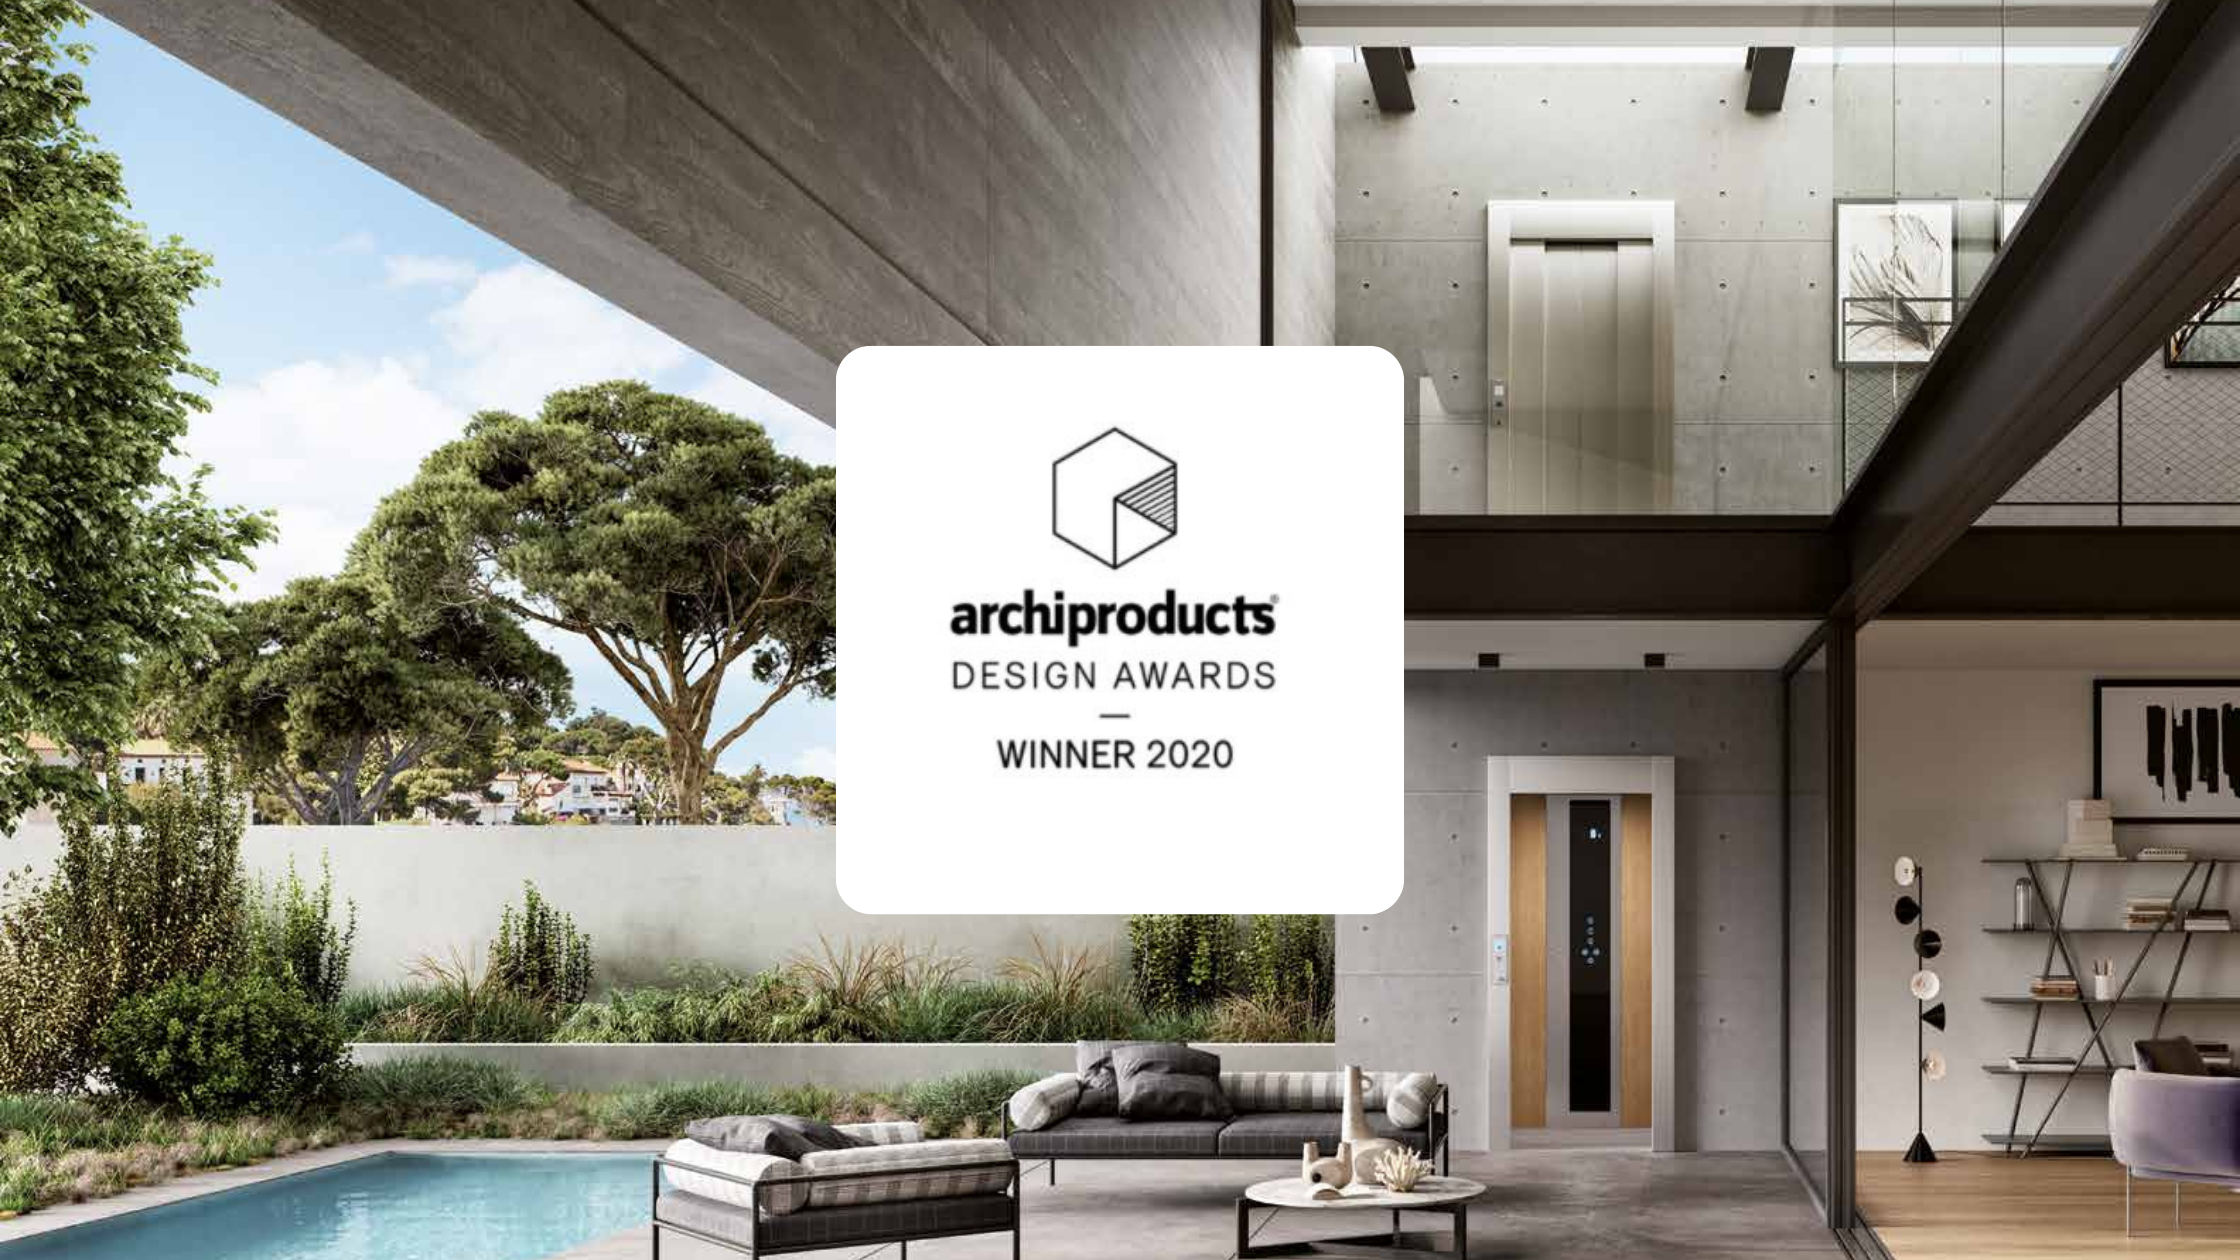 Archiproducts Design Awards Winner